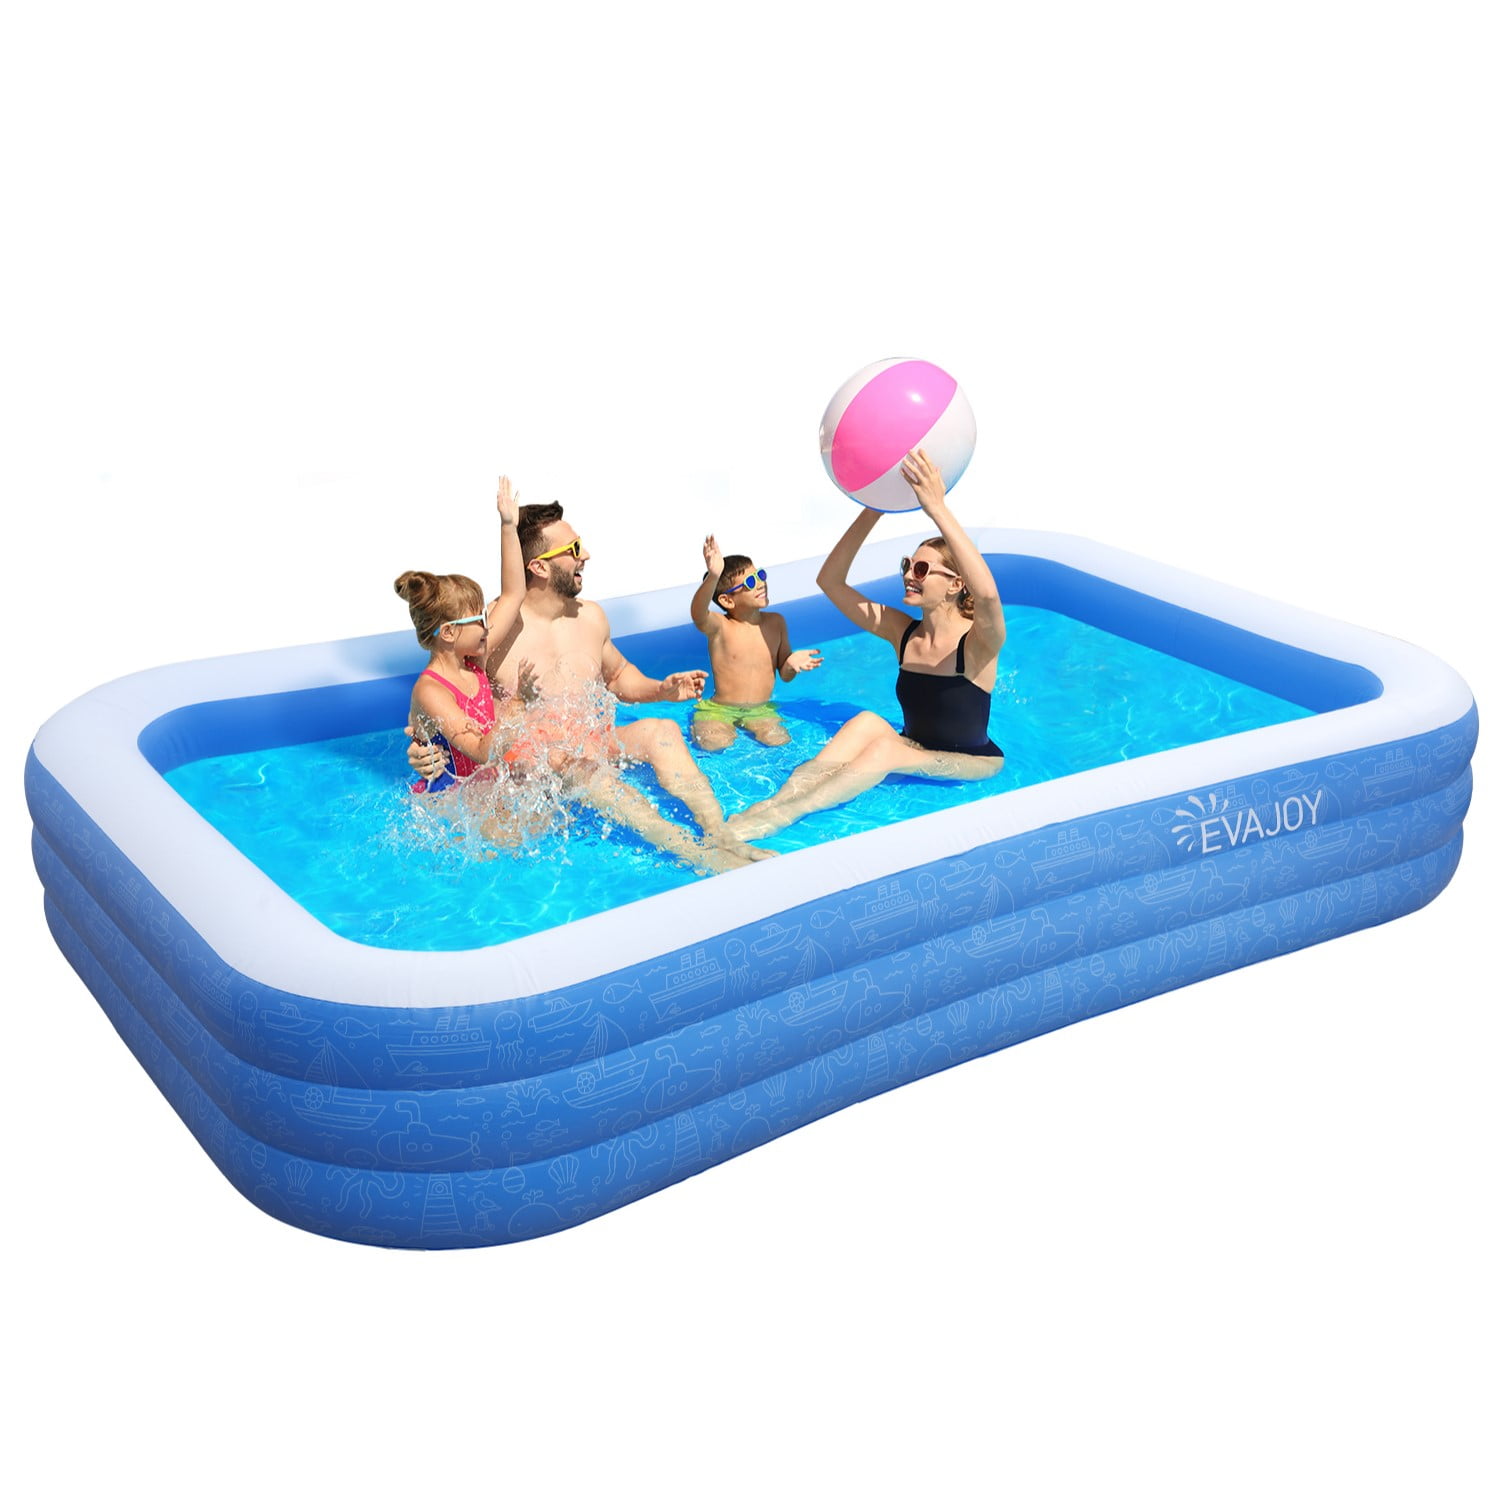 Joyjoz Inflatable Pool 97 X 57 X 27 Rectangular Lounge Pool Large Adult Swimming Pools Swimming Pools for Backyard Thick Full-Sized Family Kids Pool Above Ground Blow up Pool for Kids Adults 